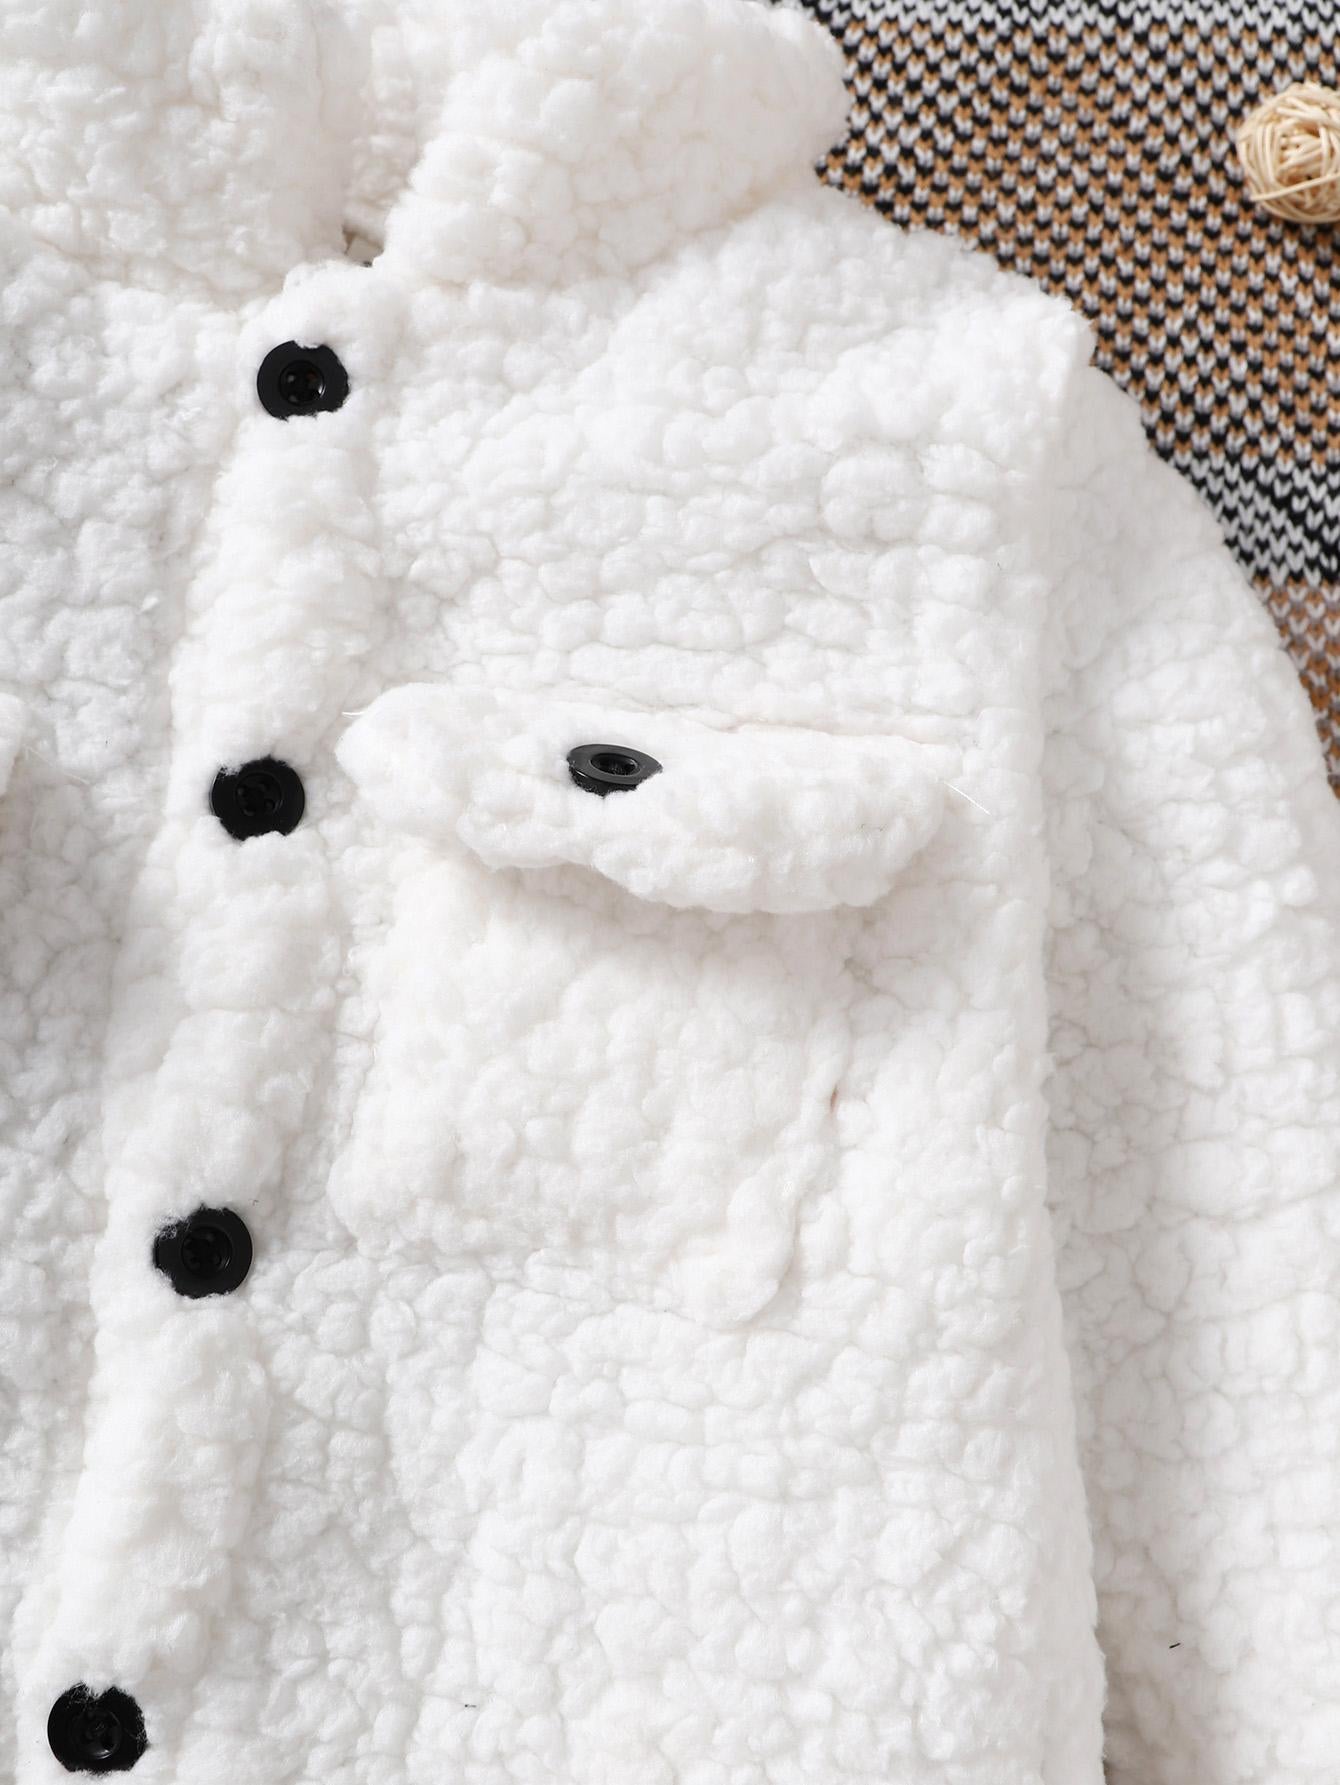 3-7Y Baby Girls Coat Turn-down Collar Winter Long Sleeve Fluffy One Piece Clothes White Catpapa  212206003